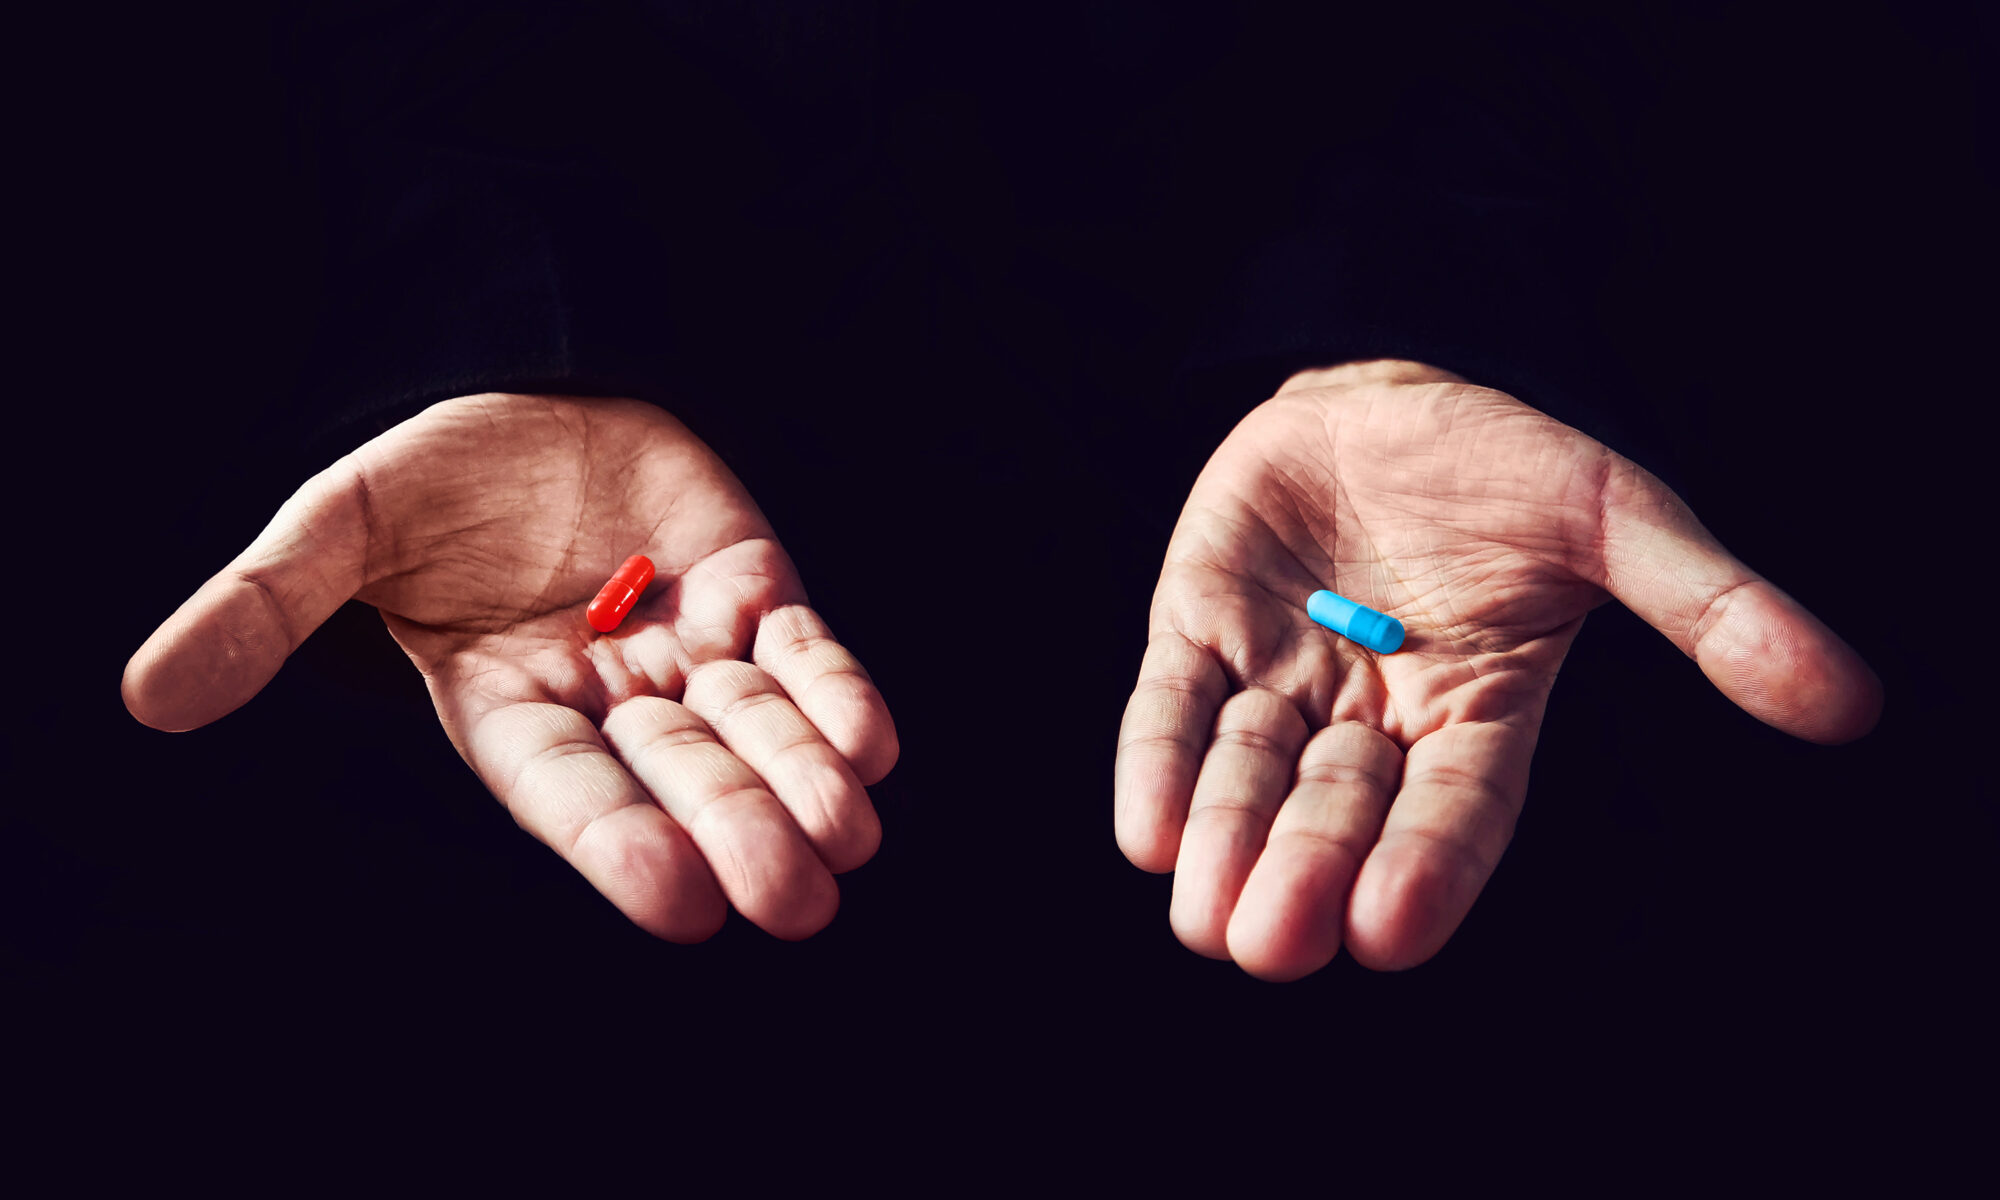 Image of two hands holding different color pills